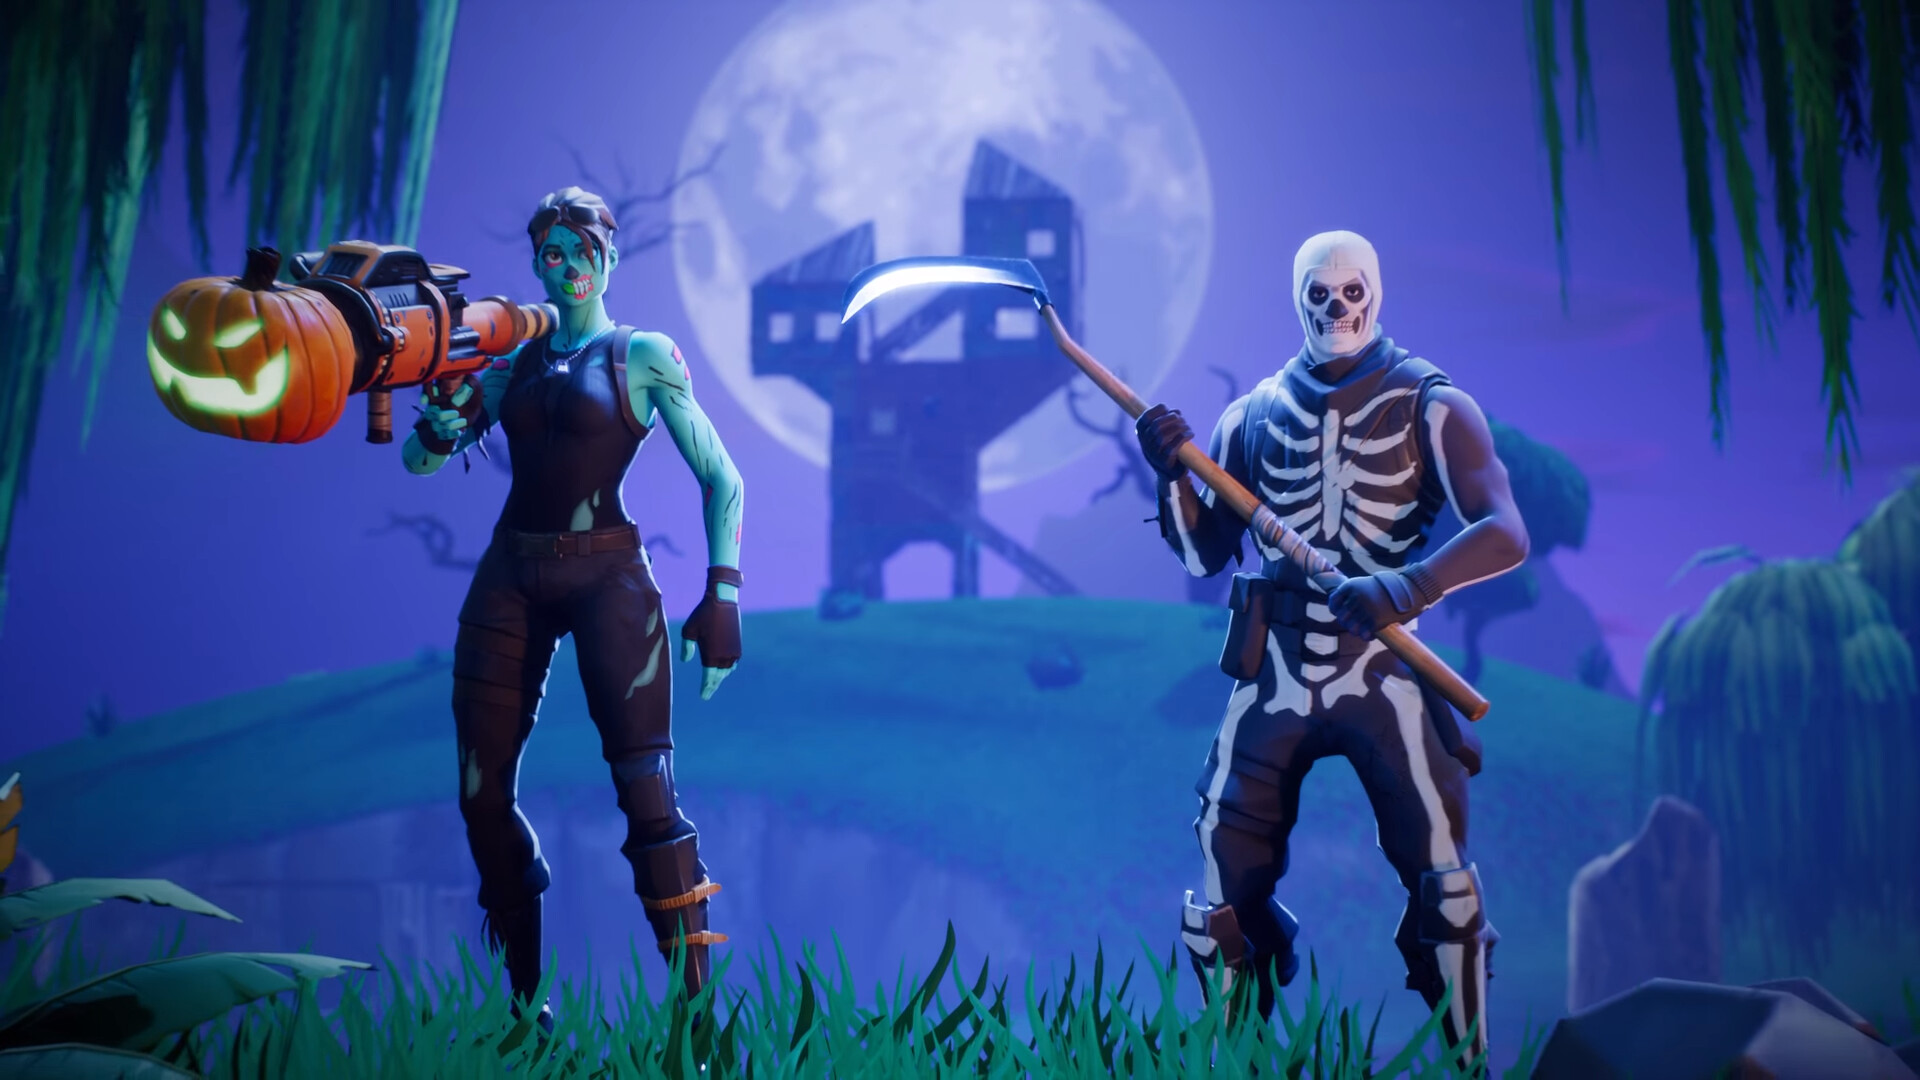 Fortnite: Players collaborate to survive in an open-world environment, by battling other characters. 1920x1080 Full HD Background.